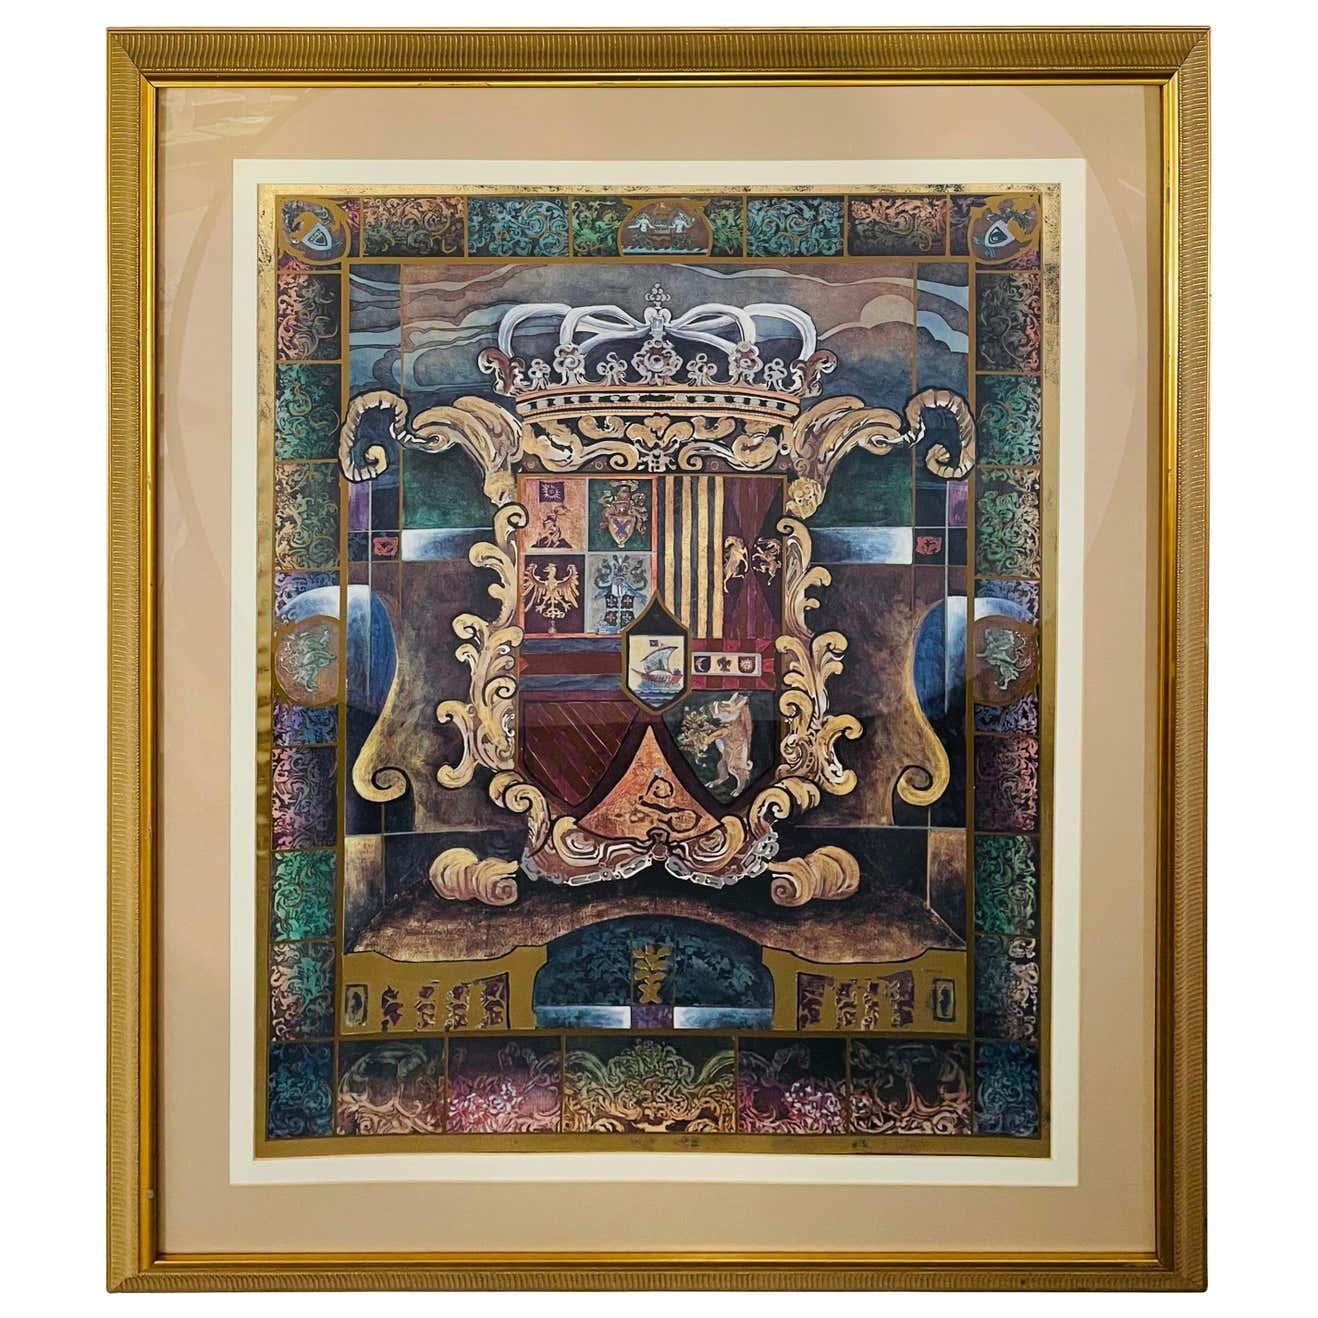 A large vintage heraldic shield with crown print showing intricate details. The print is matted and framed in a custom gilt wood frame. 

Dimensions: 43" W x 1.25" D x 52.25" H